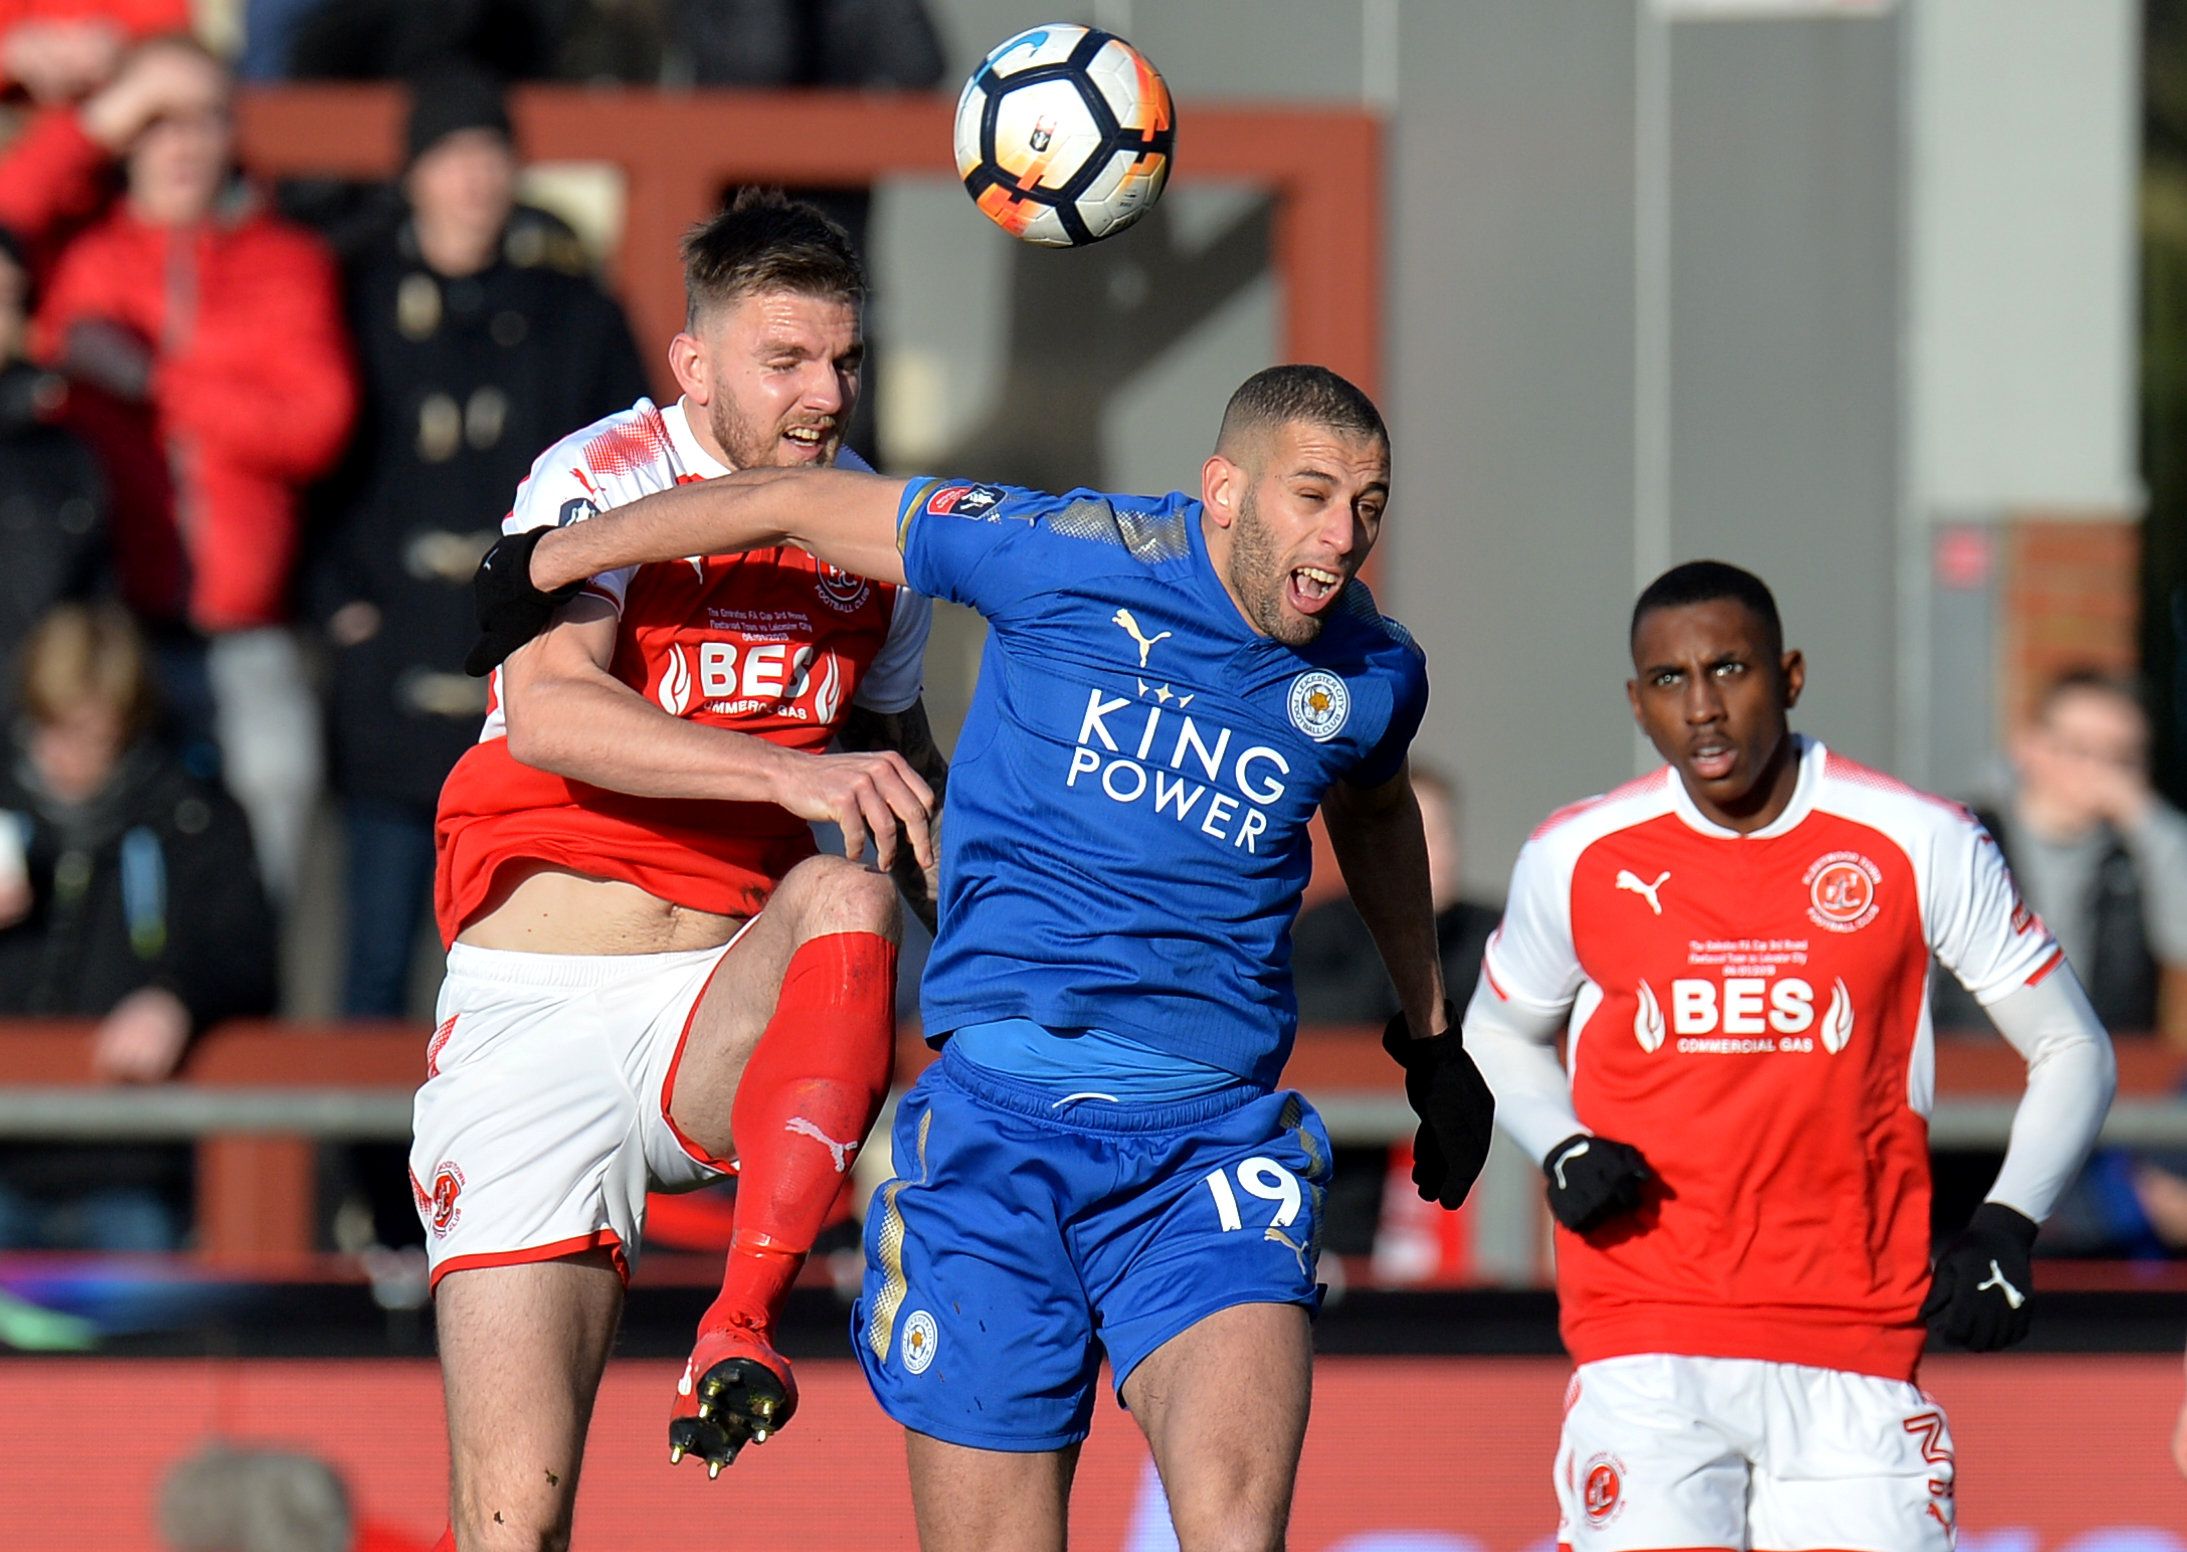 Soccer Football - FA Cup Third Round - Fleetwood Town vs Leicester City - Highbury Stadium, Fleetwood, Britain - January 6, 2018   Leicester City's Islam Slimani in action with Fleetwood Town’s Ashley Eastham    REUTERS/Peter Powell